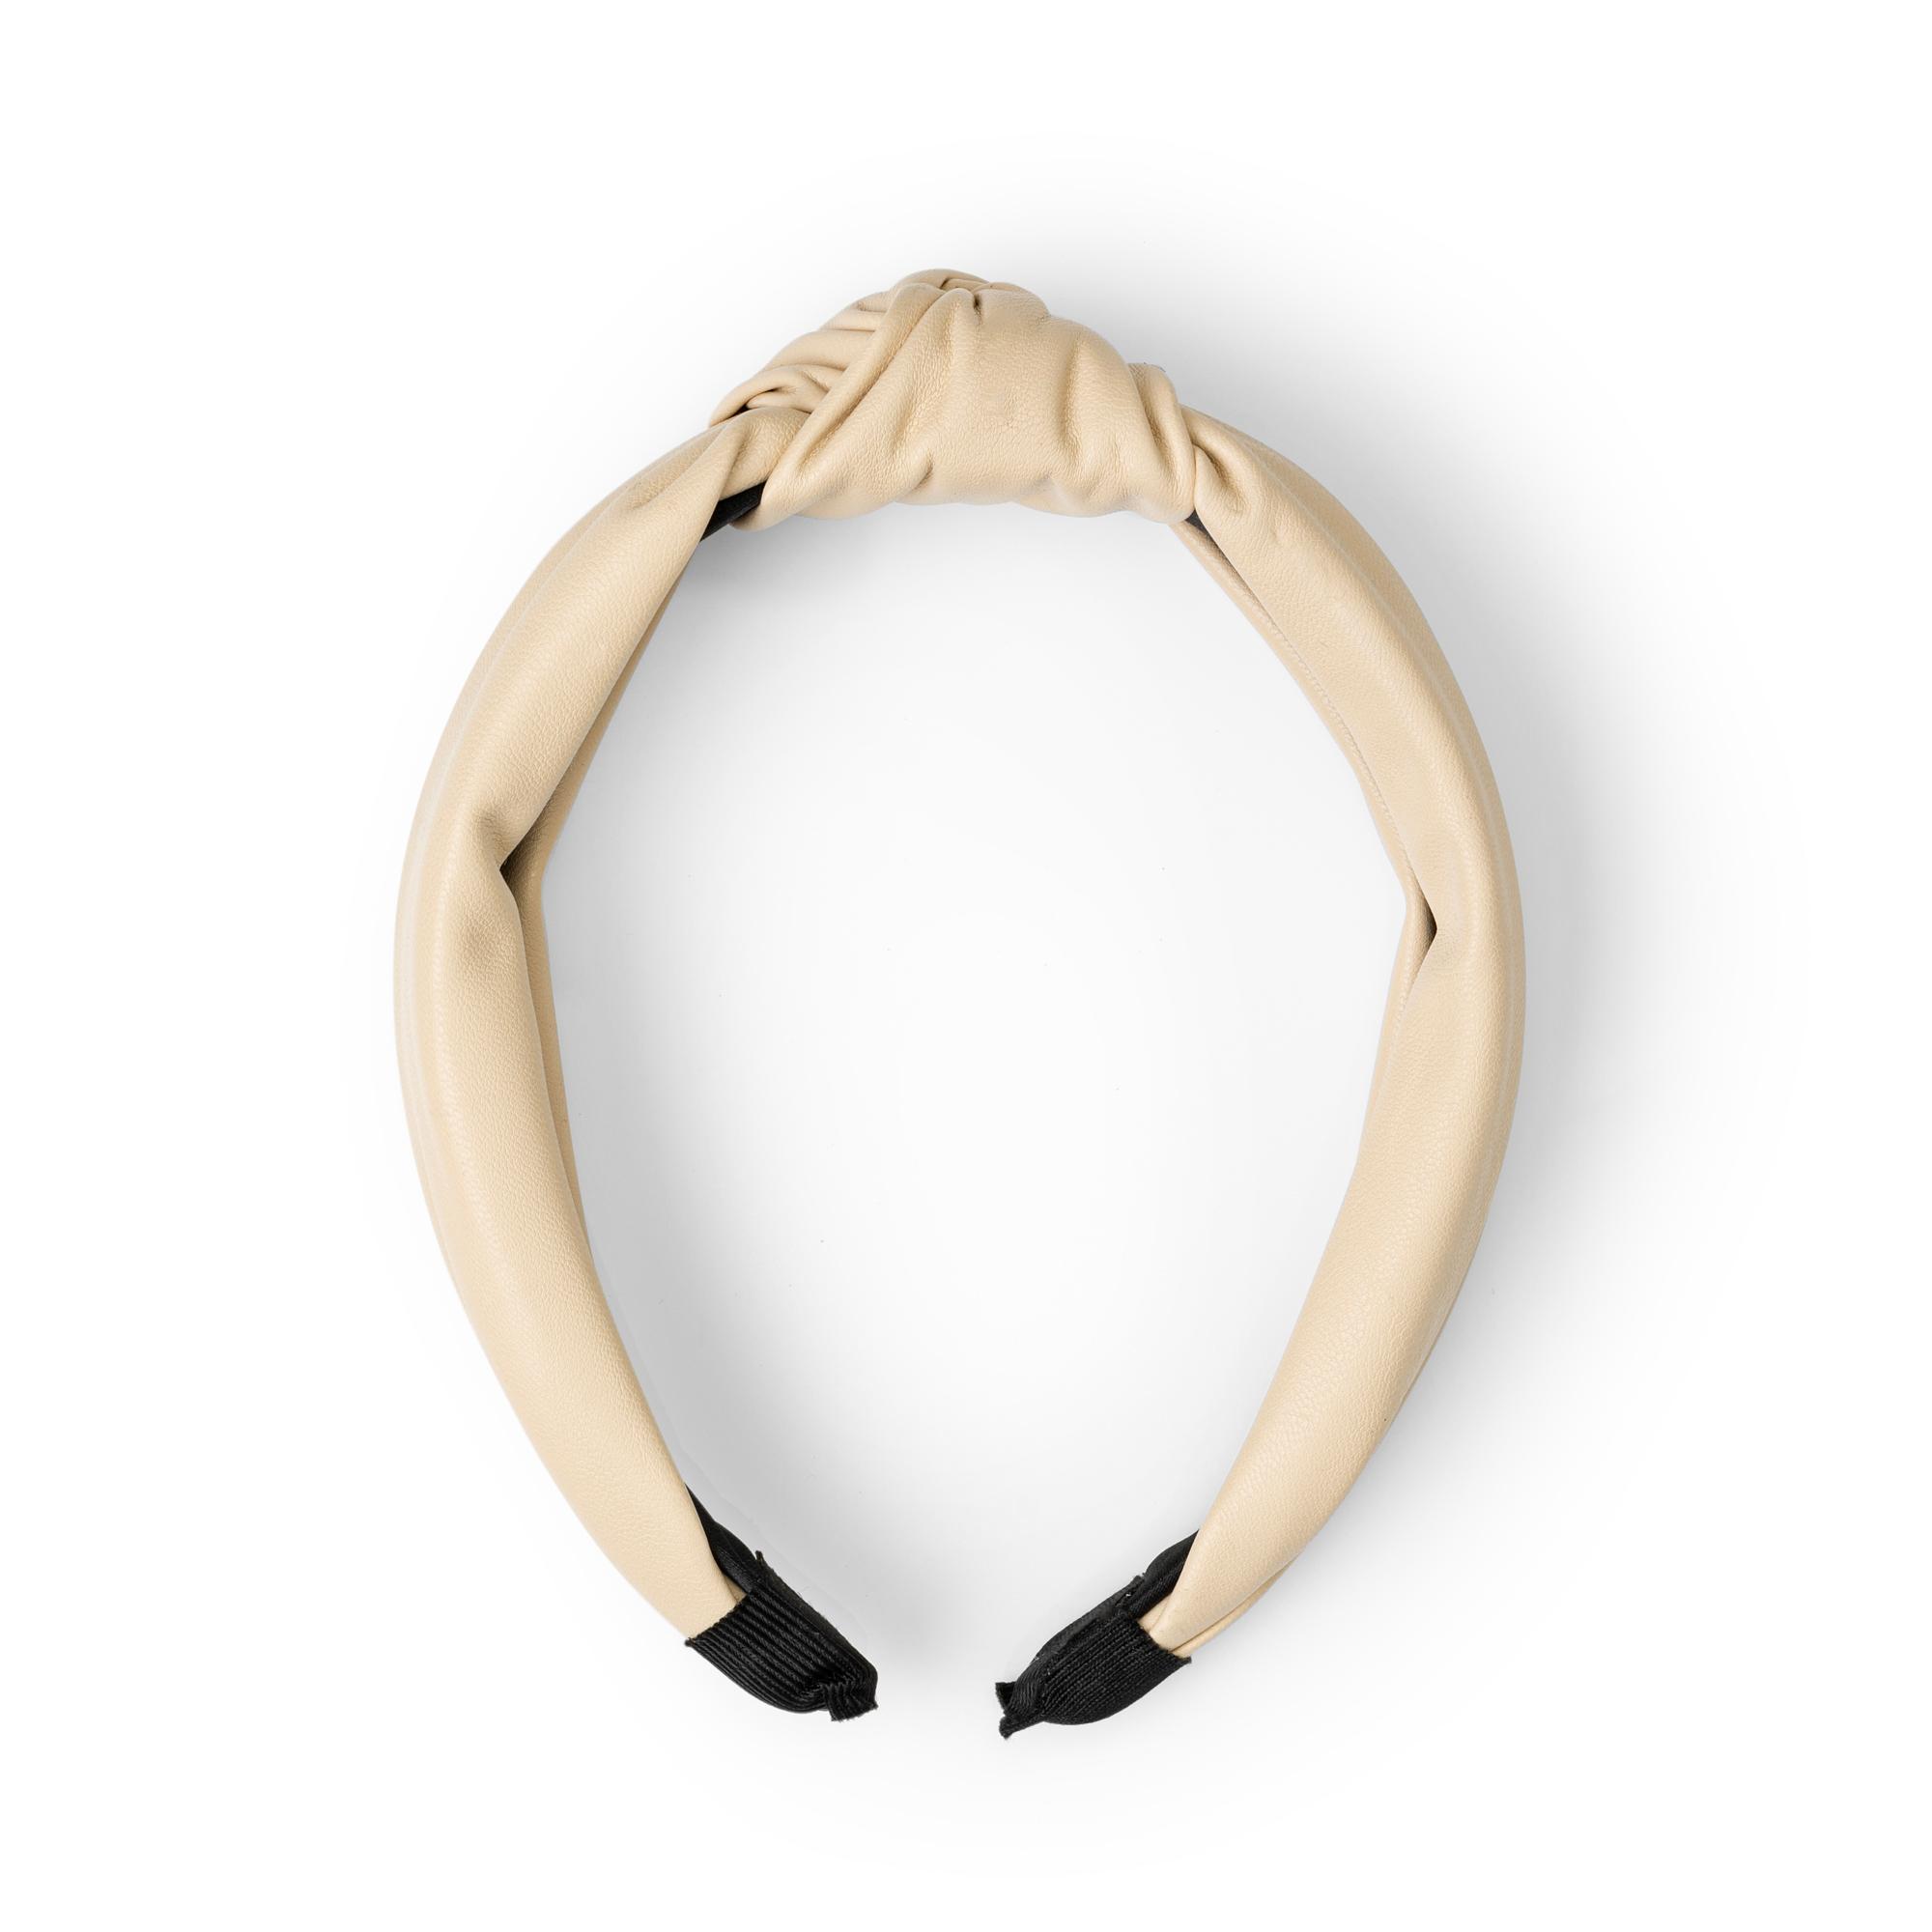 Product Shop Rawr Beauty - Leather Look Knotted Headband- Cream (RW1132) image